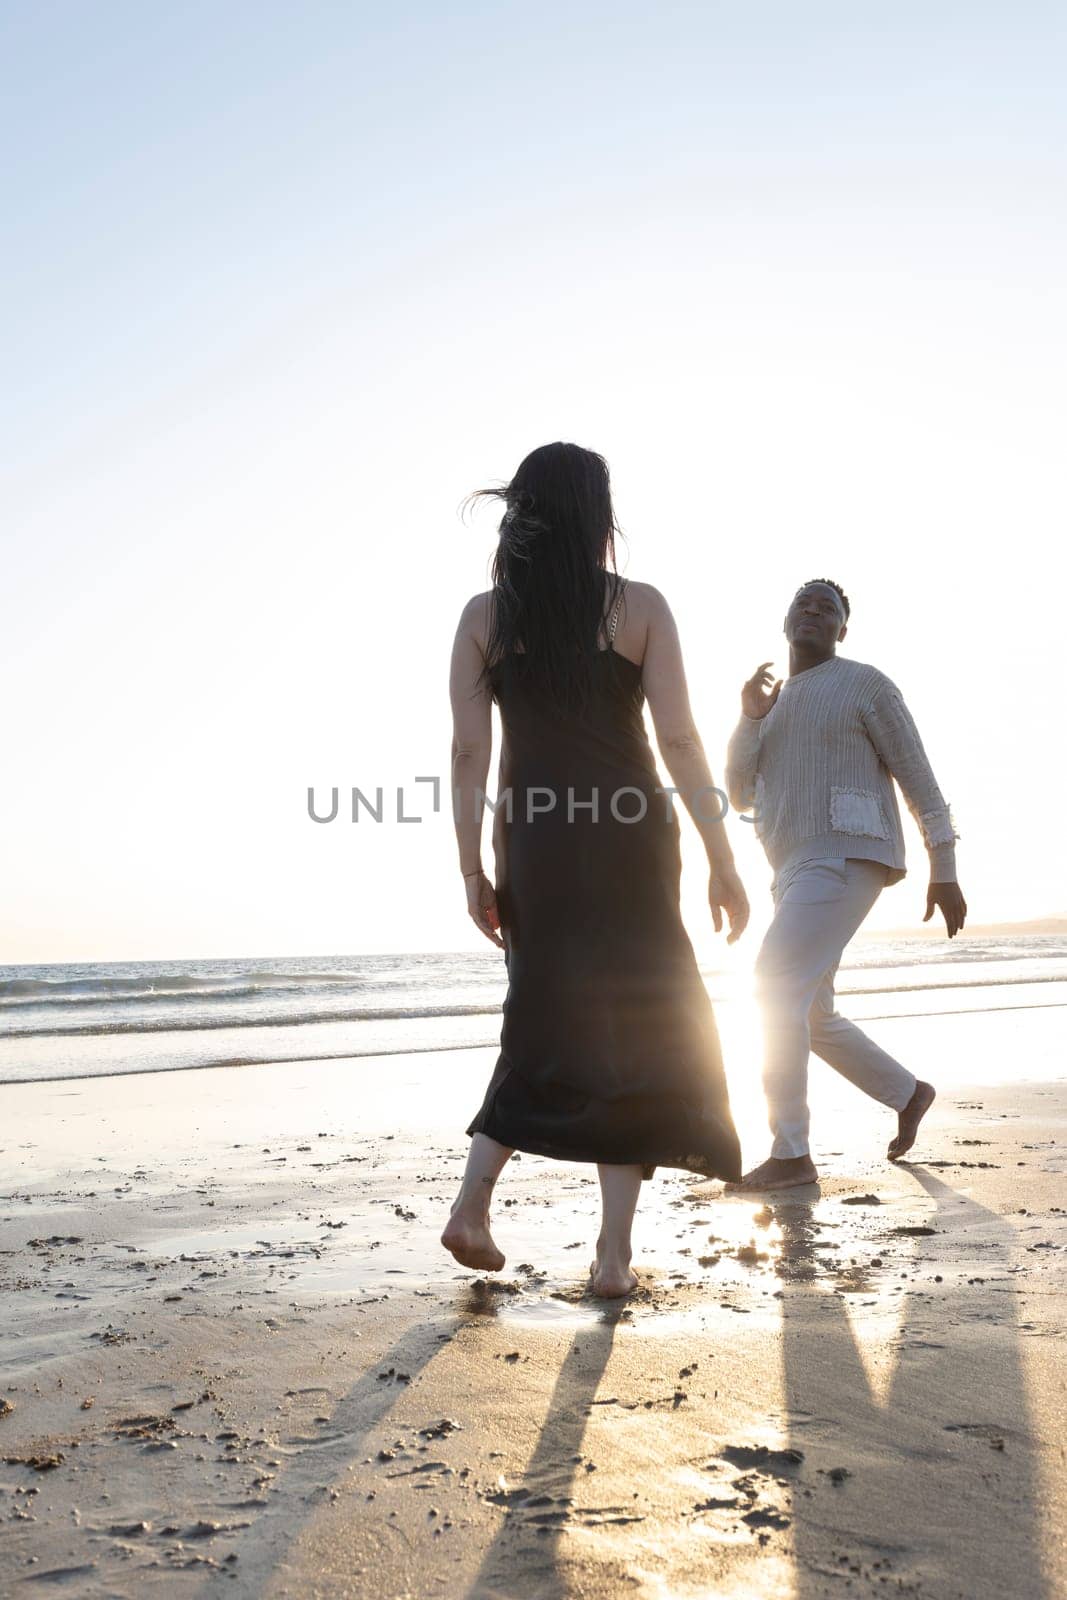 A woman and a man are walking on the beach. The woman is wearing a black dress and the man is wearing a white sweater. The sun is setting in the background, creating a warm and peaceful atmosphere